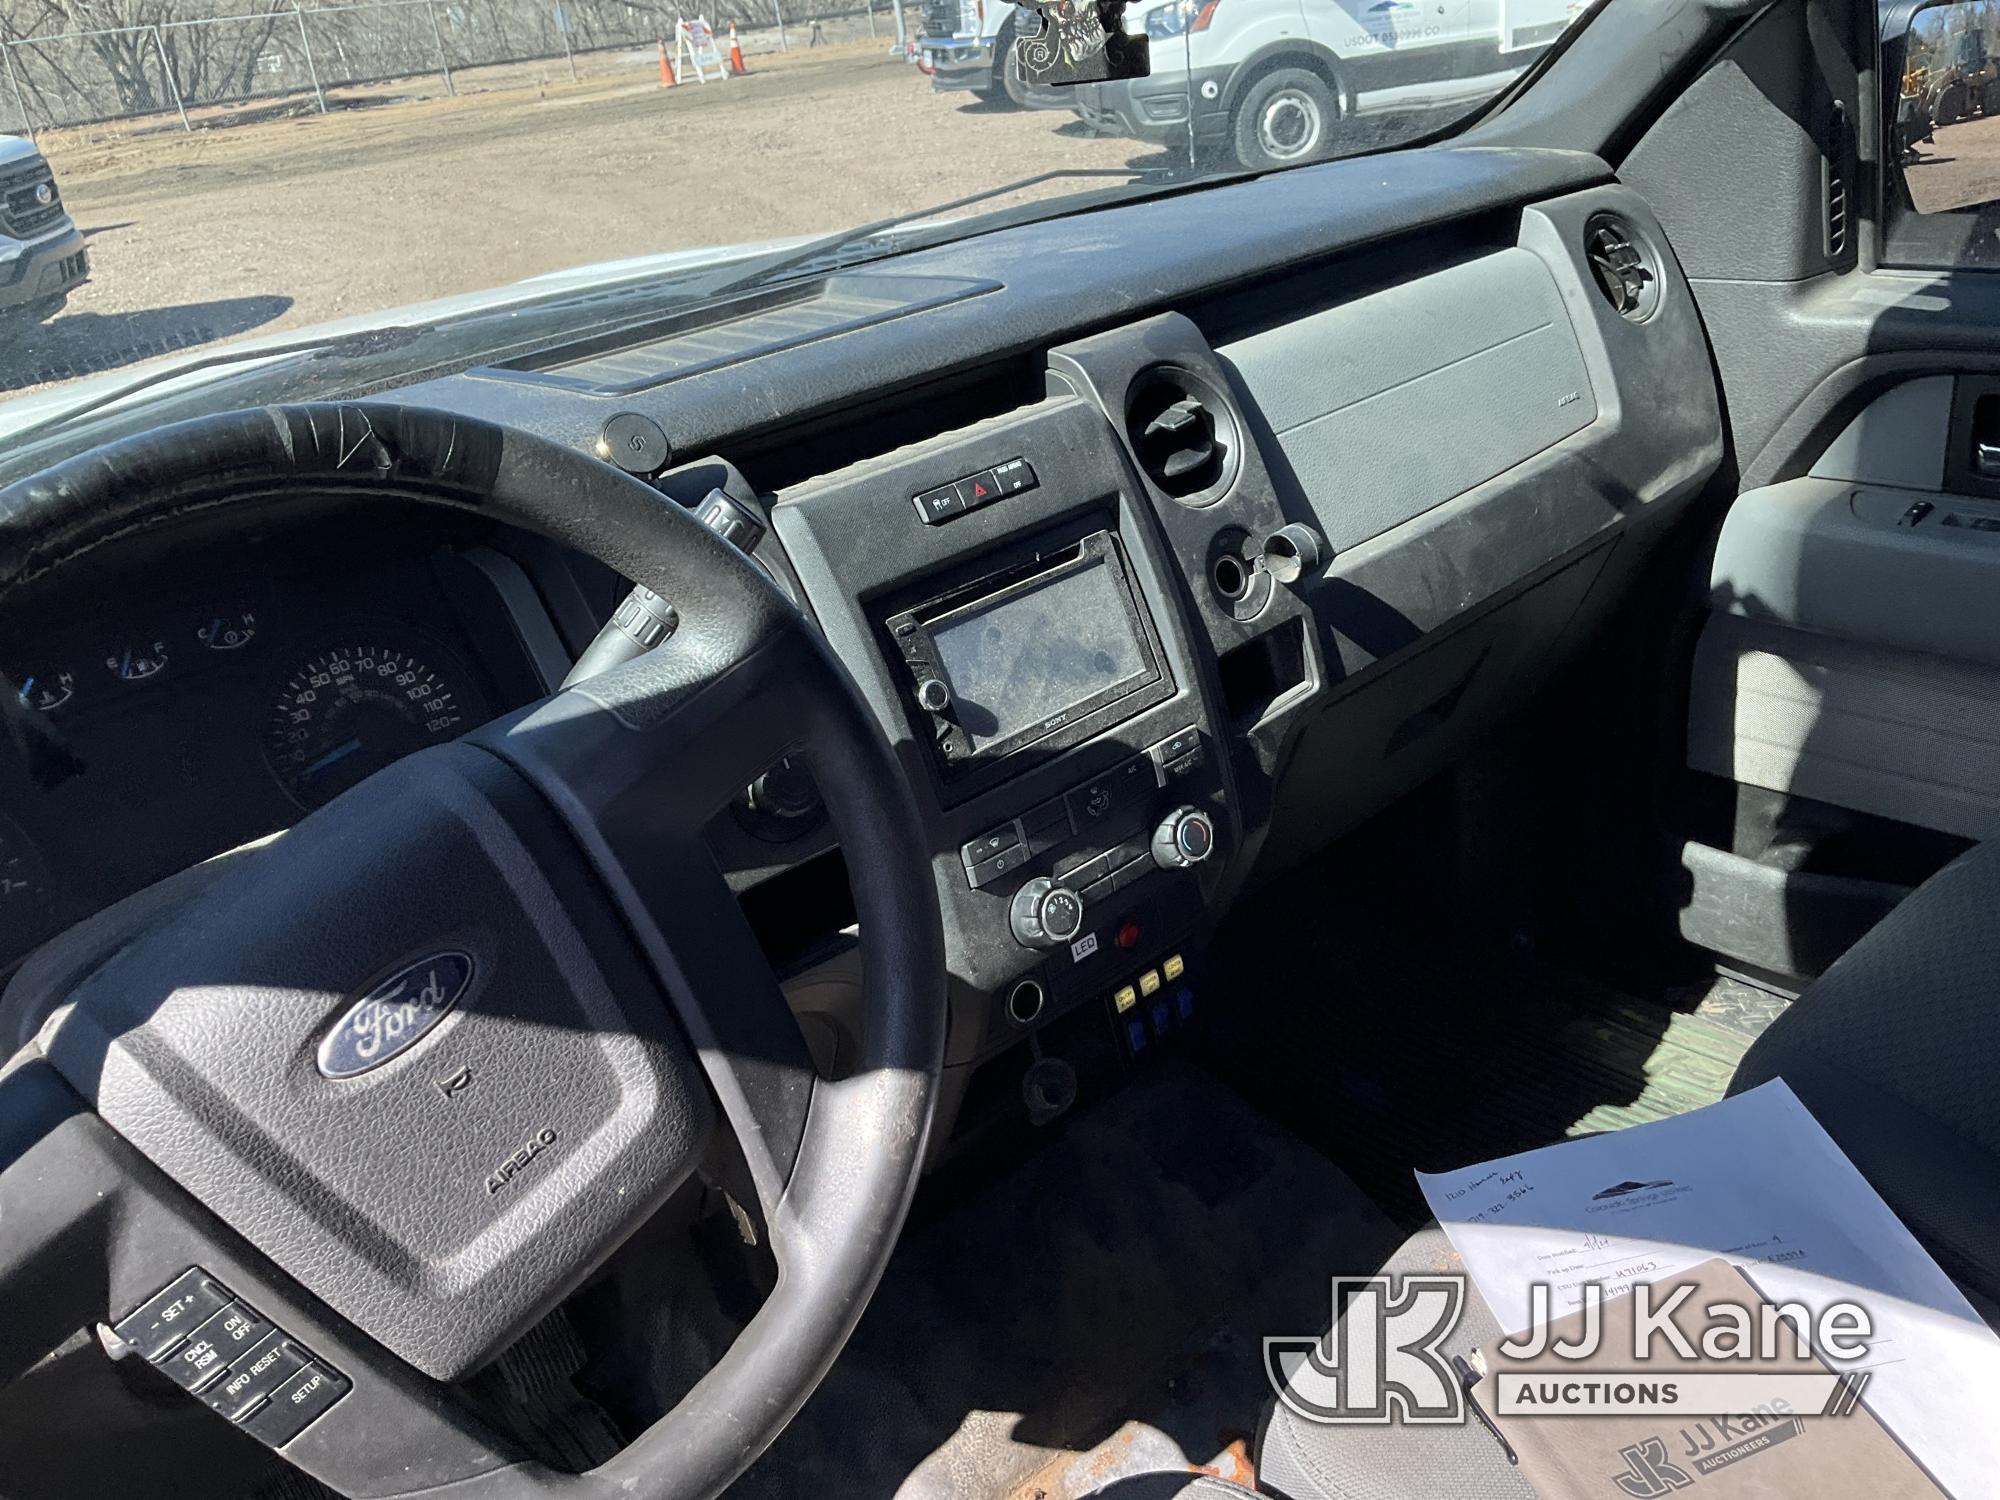 (Castle Rock, CO) 2014 Ford F150 4x4 Extended-Cab Pickup Truck Runs & Moves